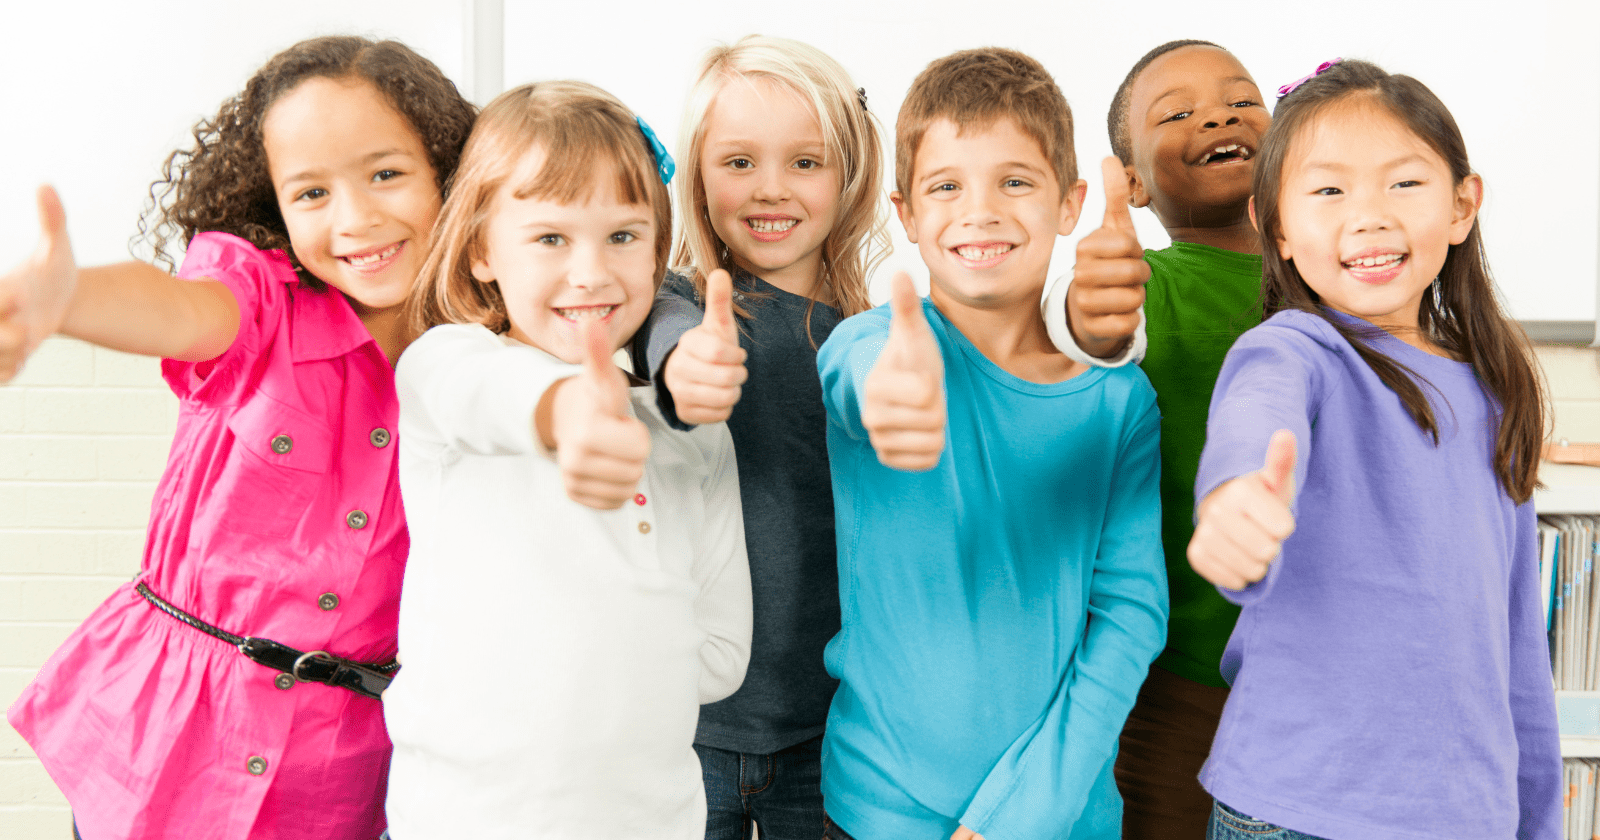 Photo shows smiling children showing thumbs up.